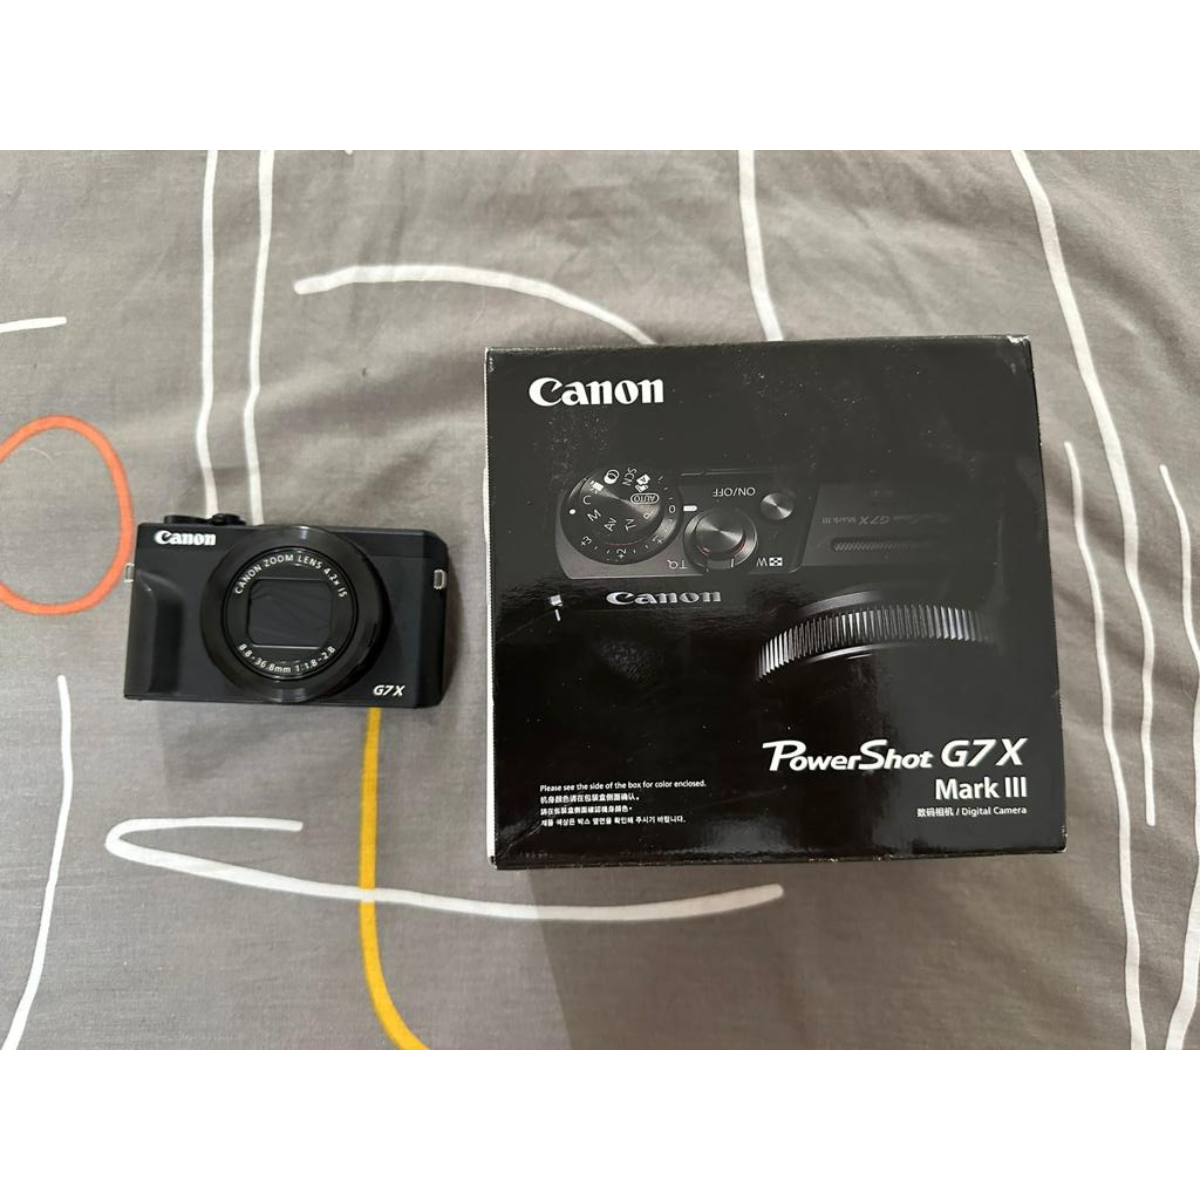 Canon Powershot G7X Mark III and its Fantasea Underwater Housing (Pre-Owned)